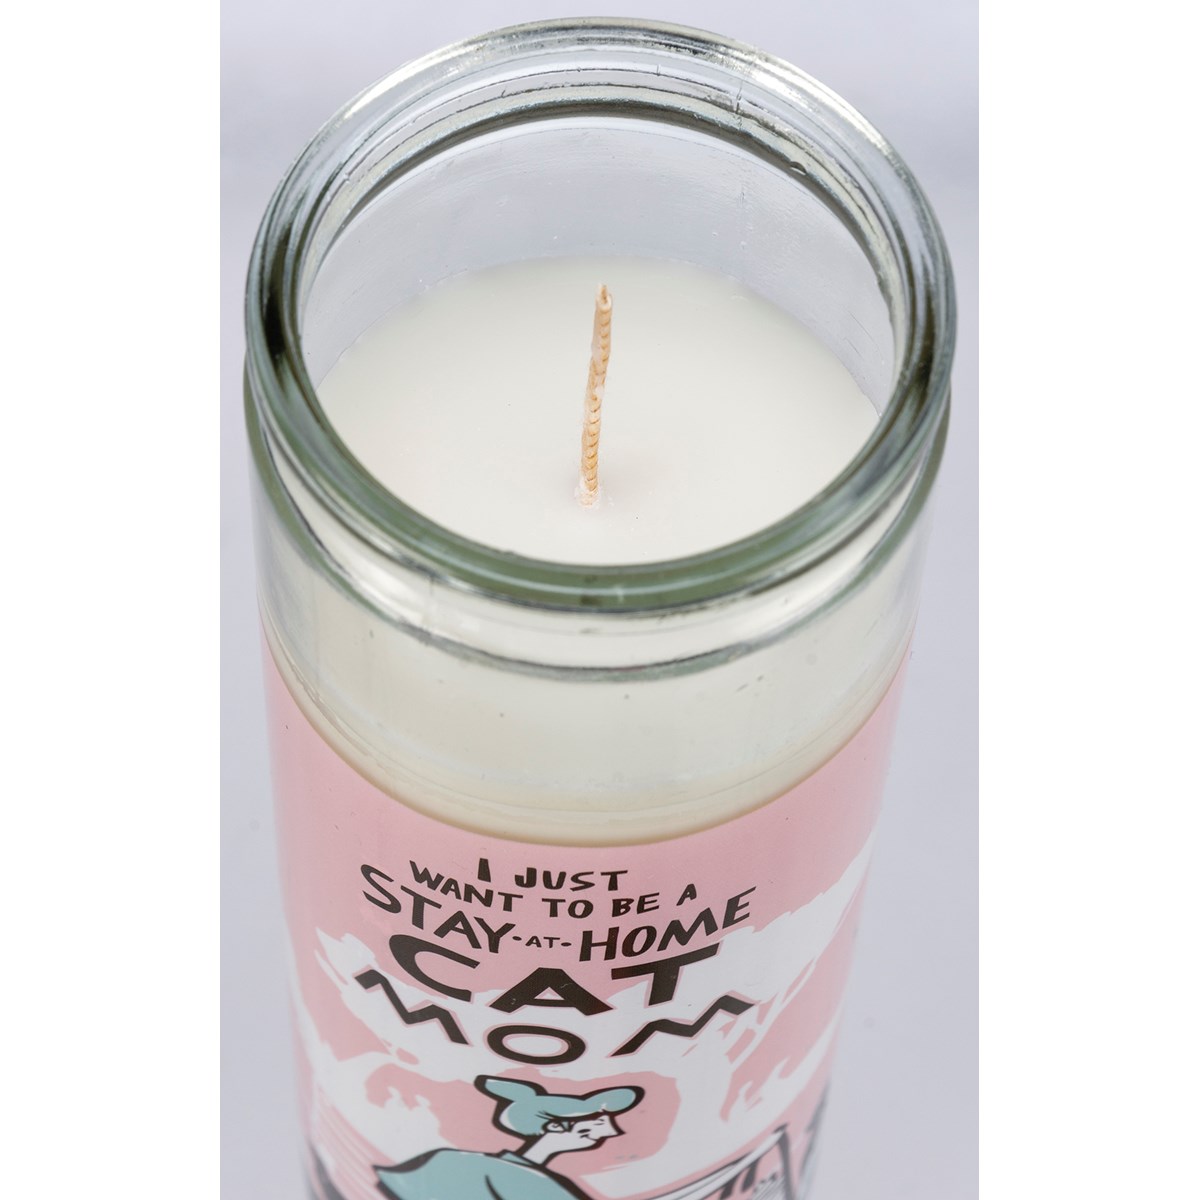 I Want To Be A Stay At Home Cat Mom Candle - Soy Wax, Glass, Cotton